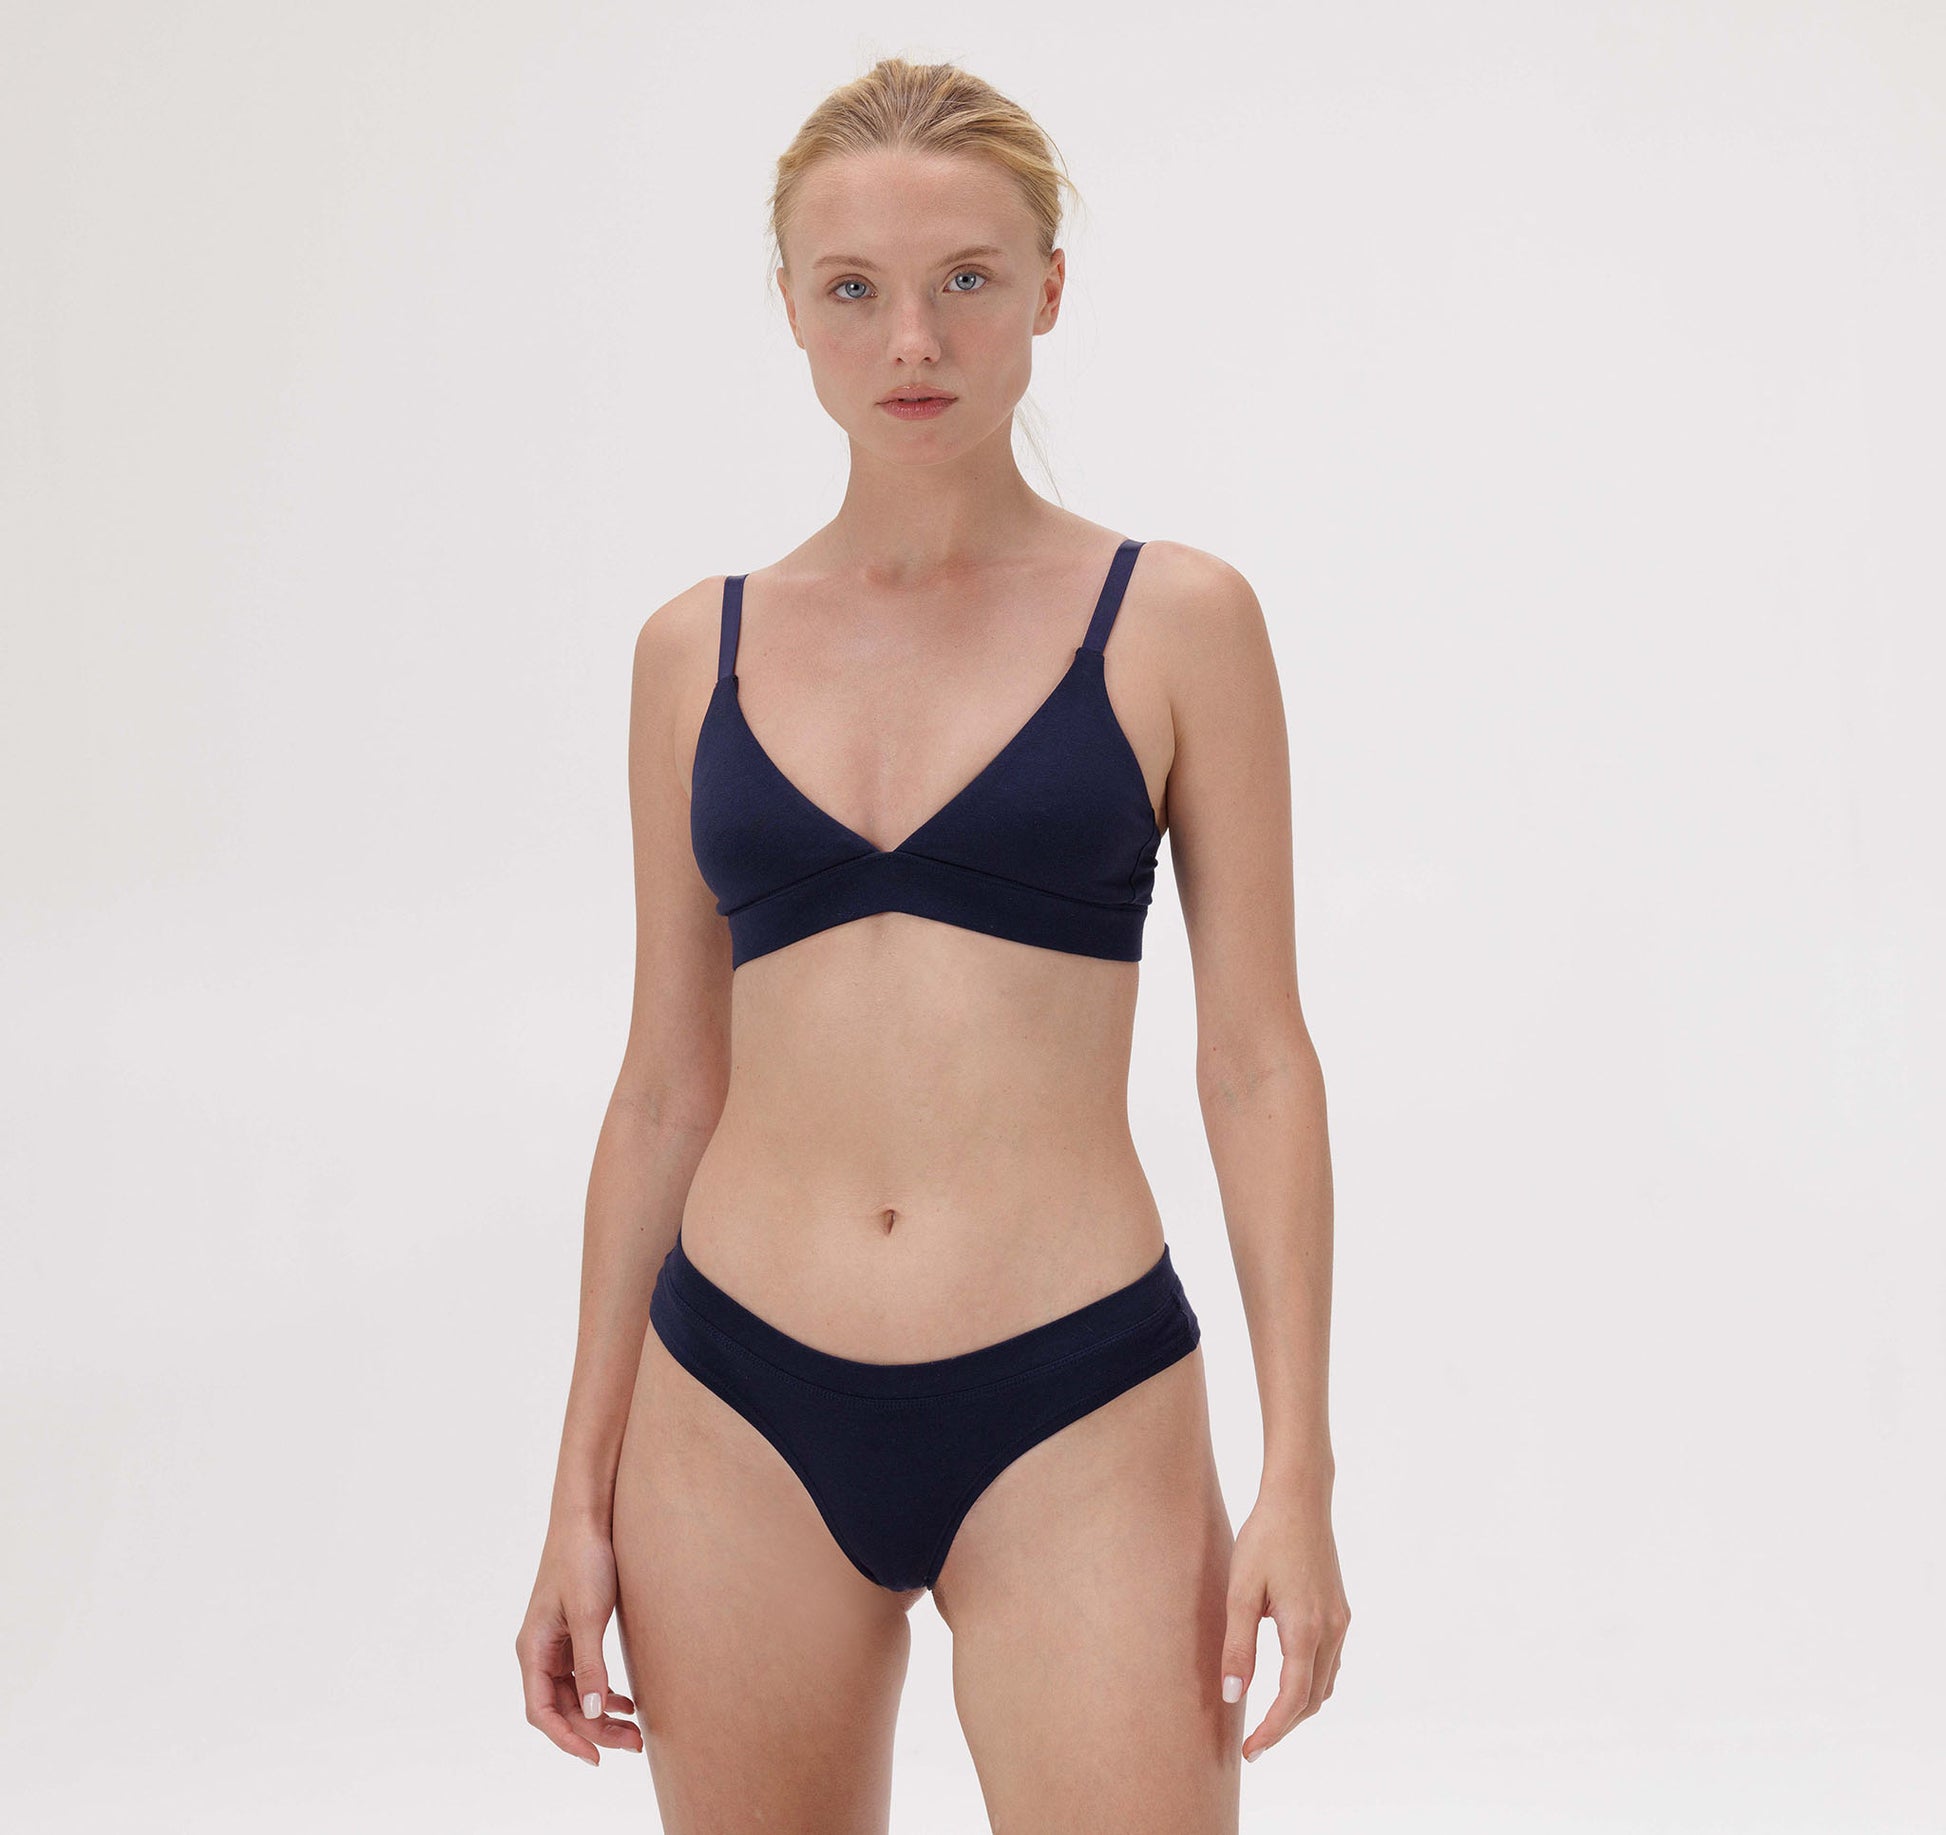 Get to know our Organic Cotton Triangle Padded Bra a little more